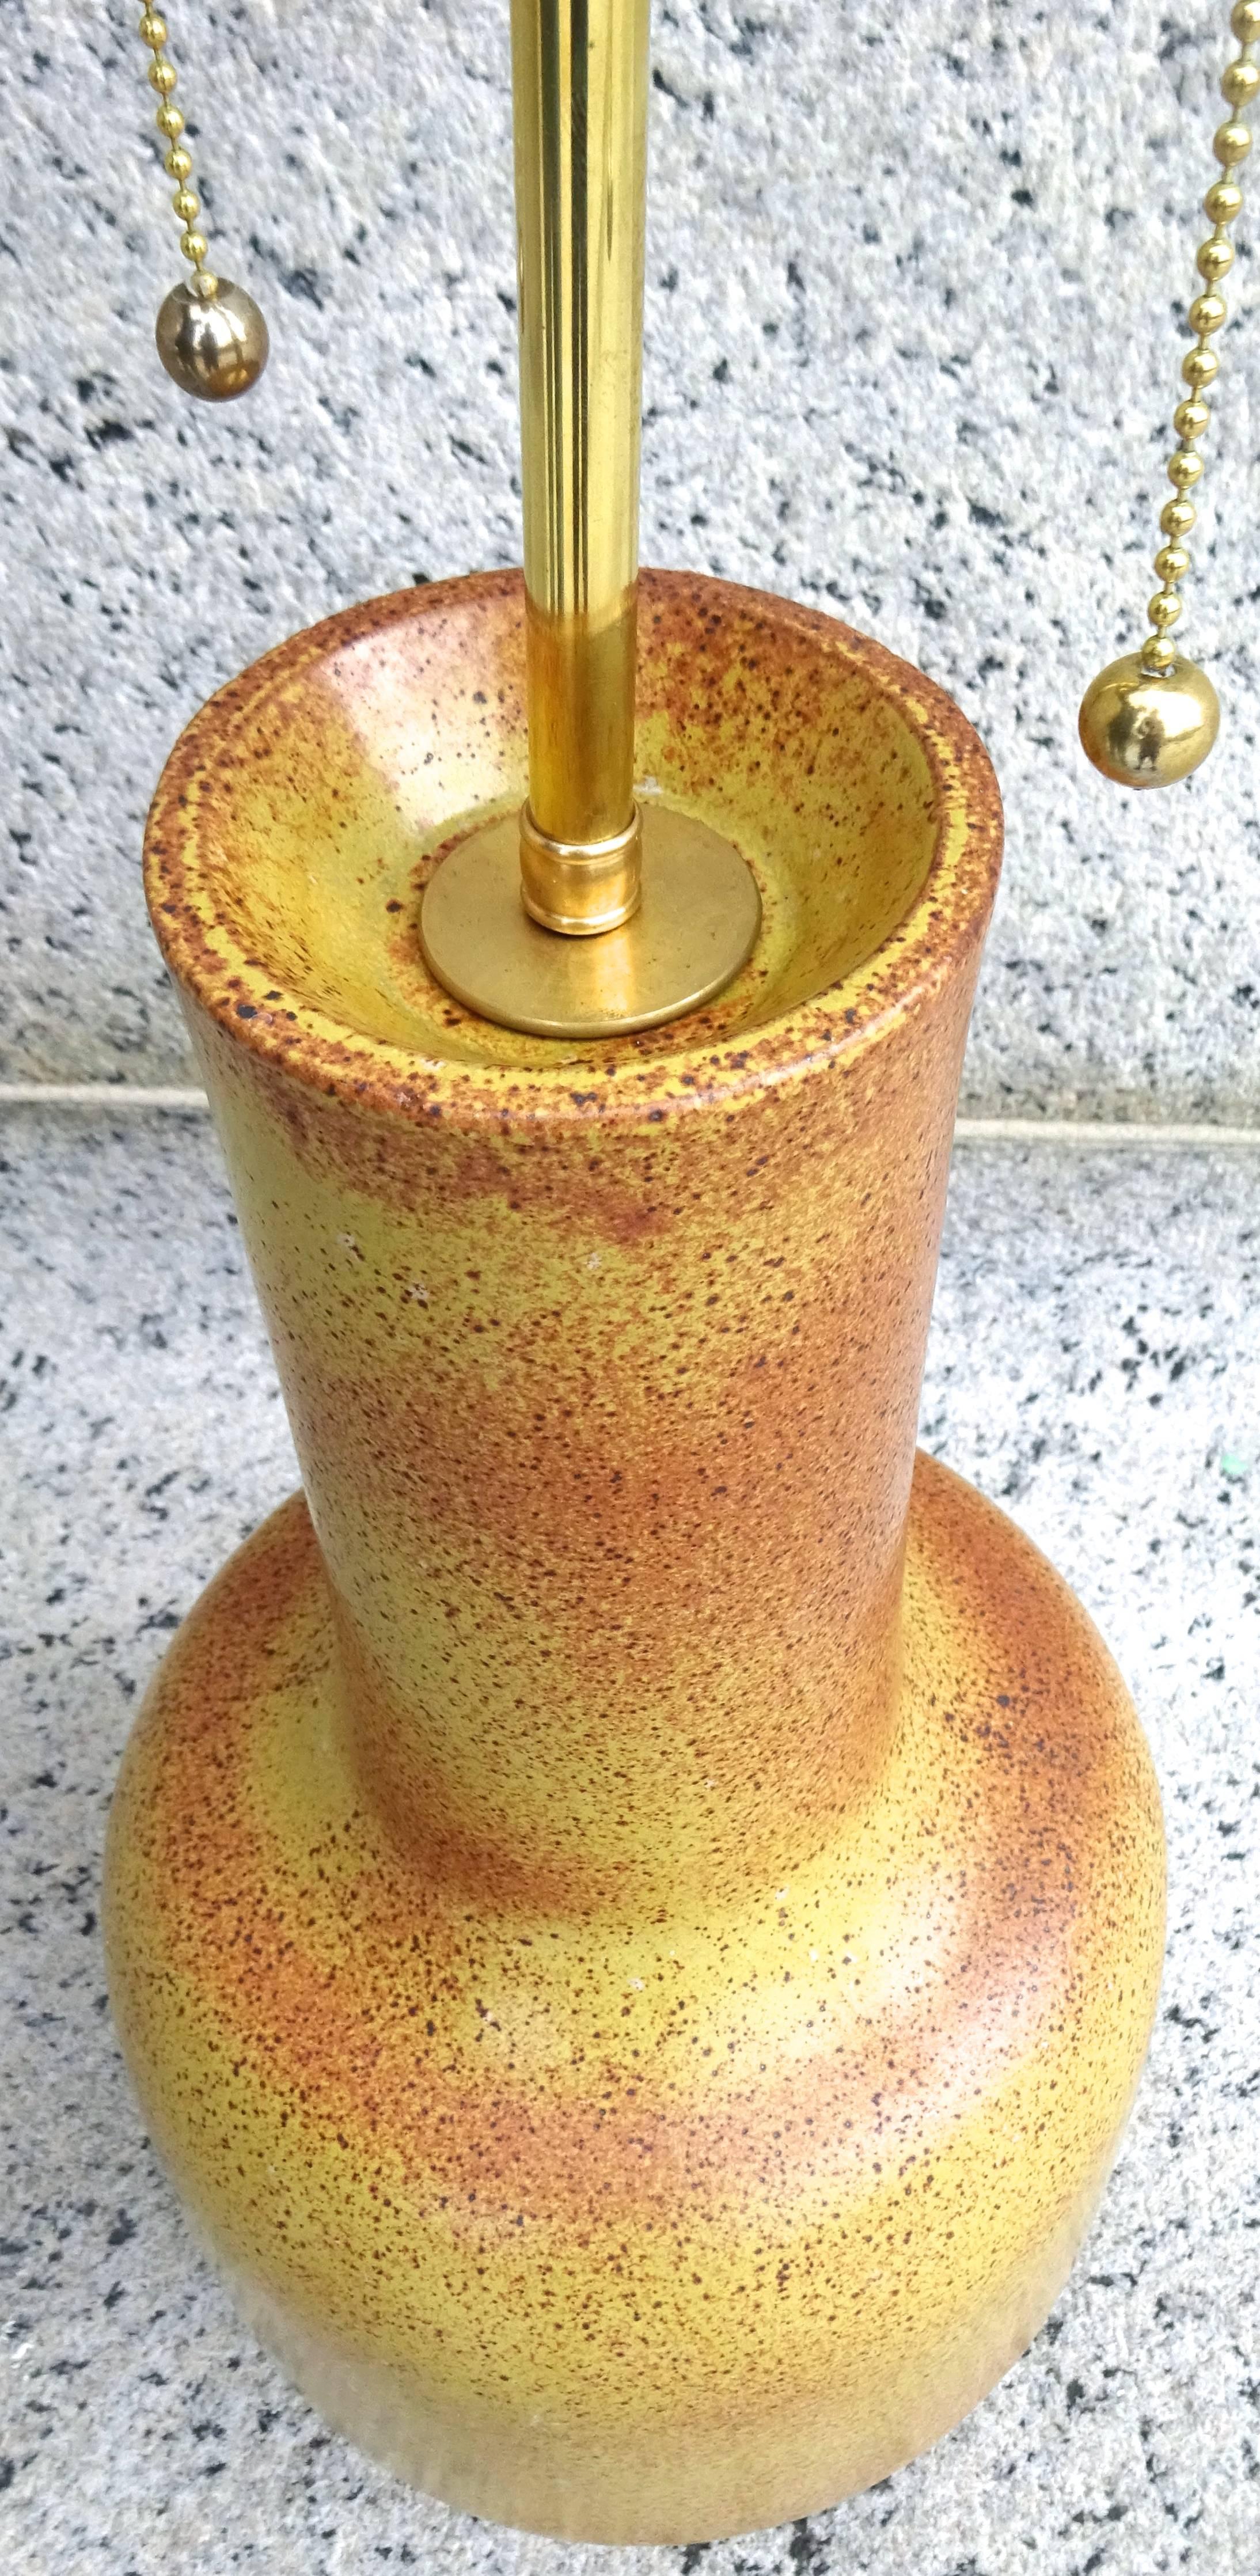 Large California Modernist 1960s David Cressey Art Pottery Table Lamp In Excellent Condition For Sale In Washington, DC